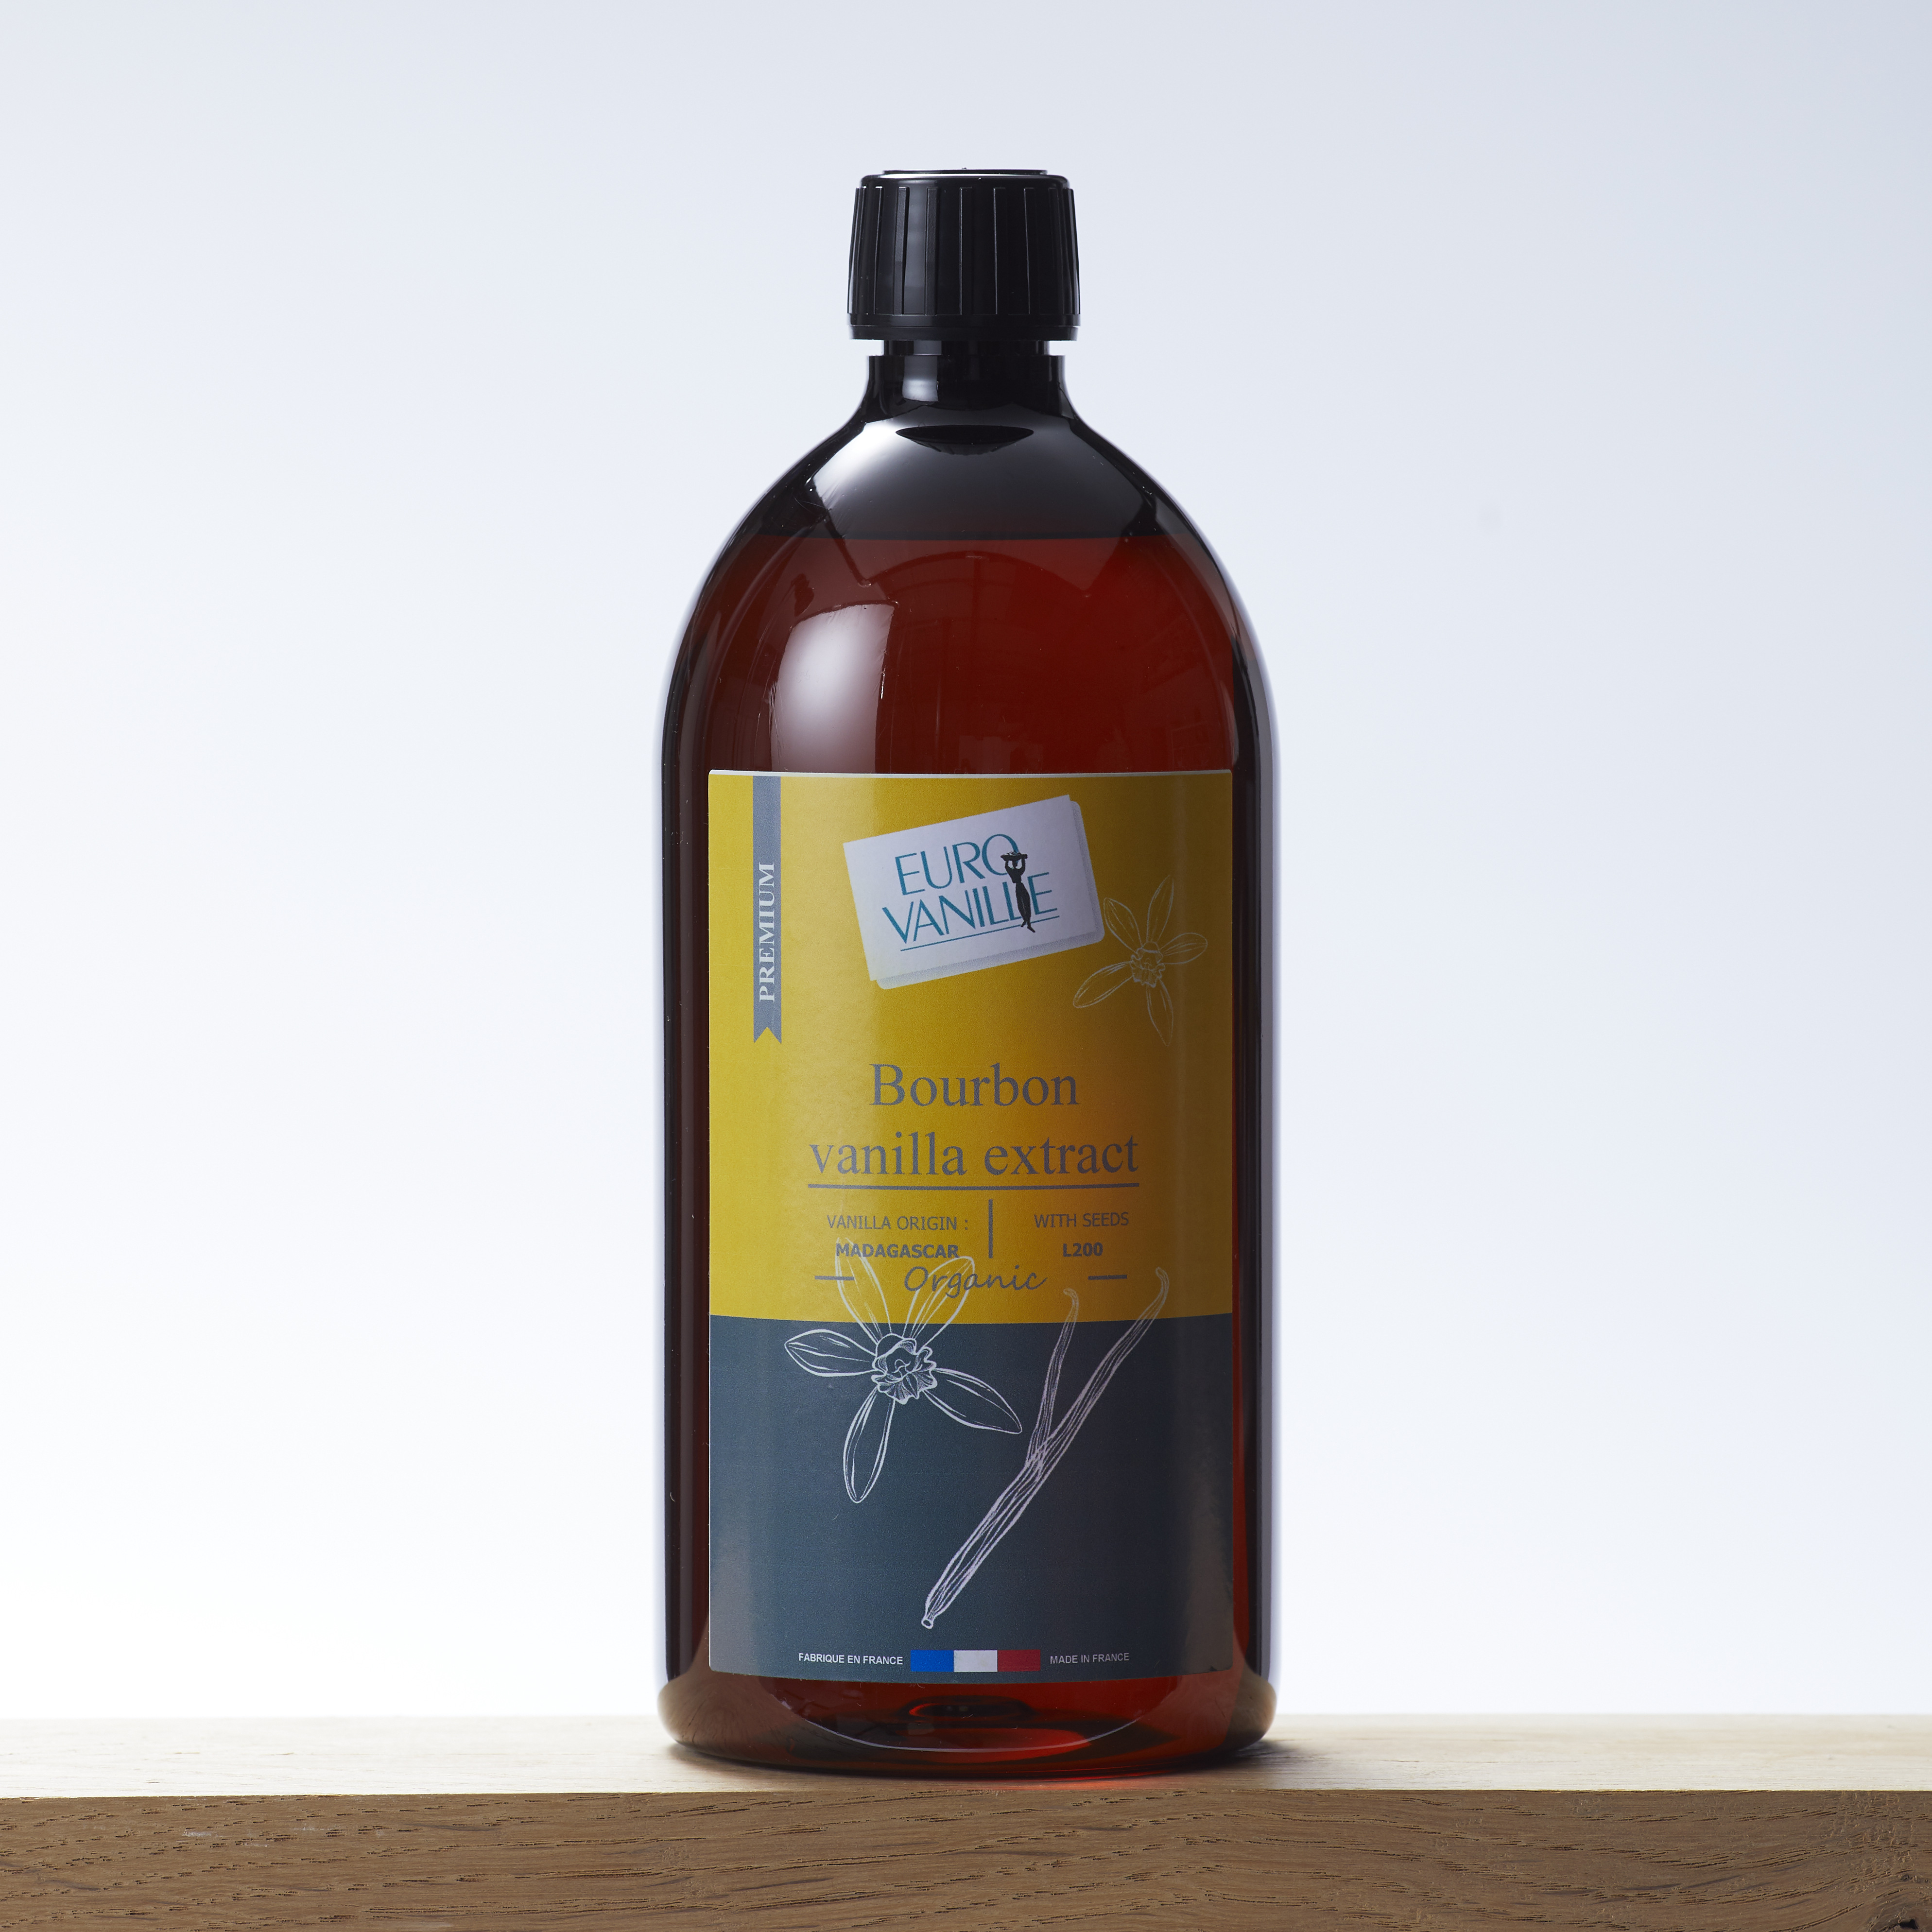 ORGANIC Bourbon vanilla extract with seeds - L200 - 1 kg